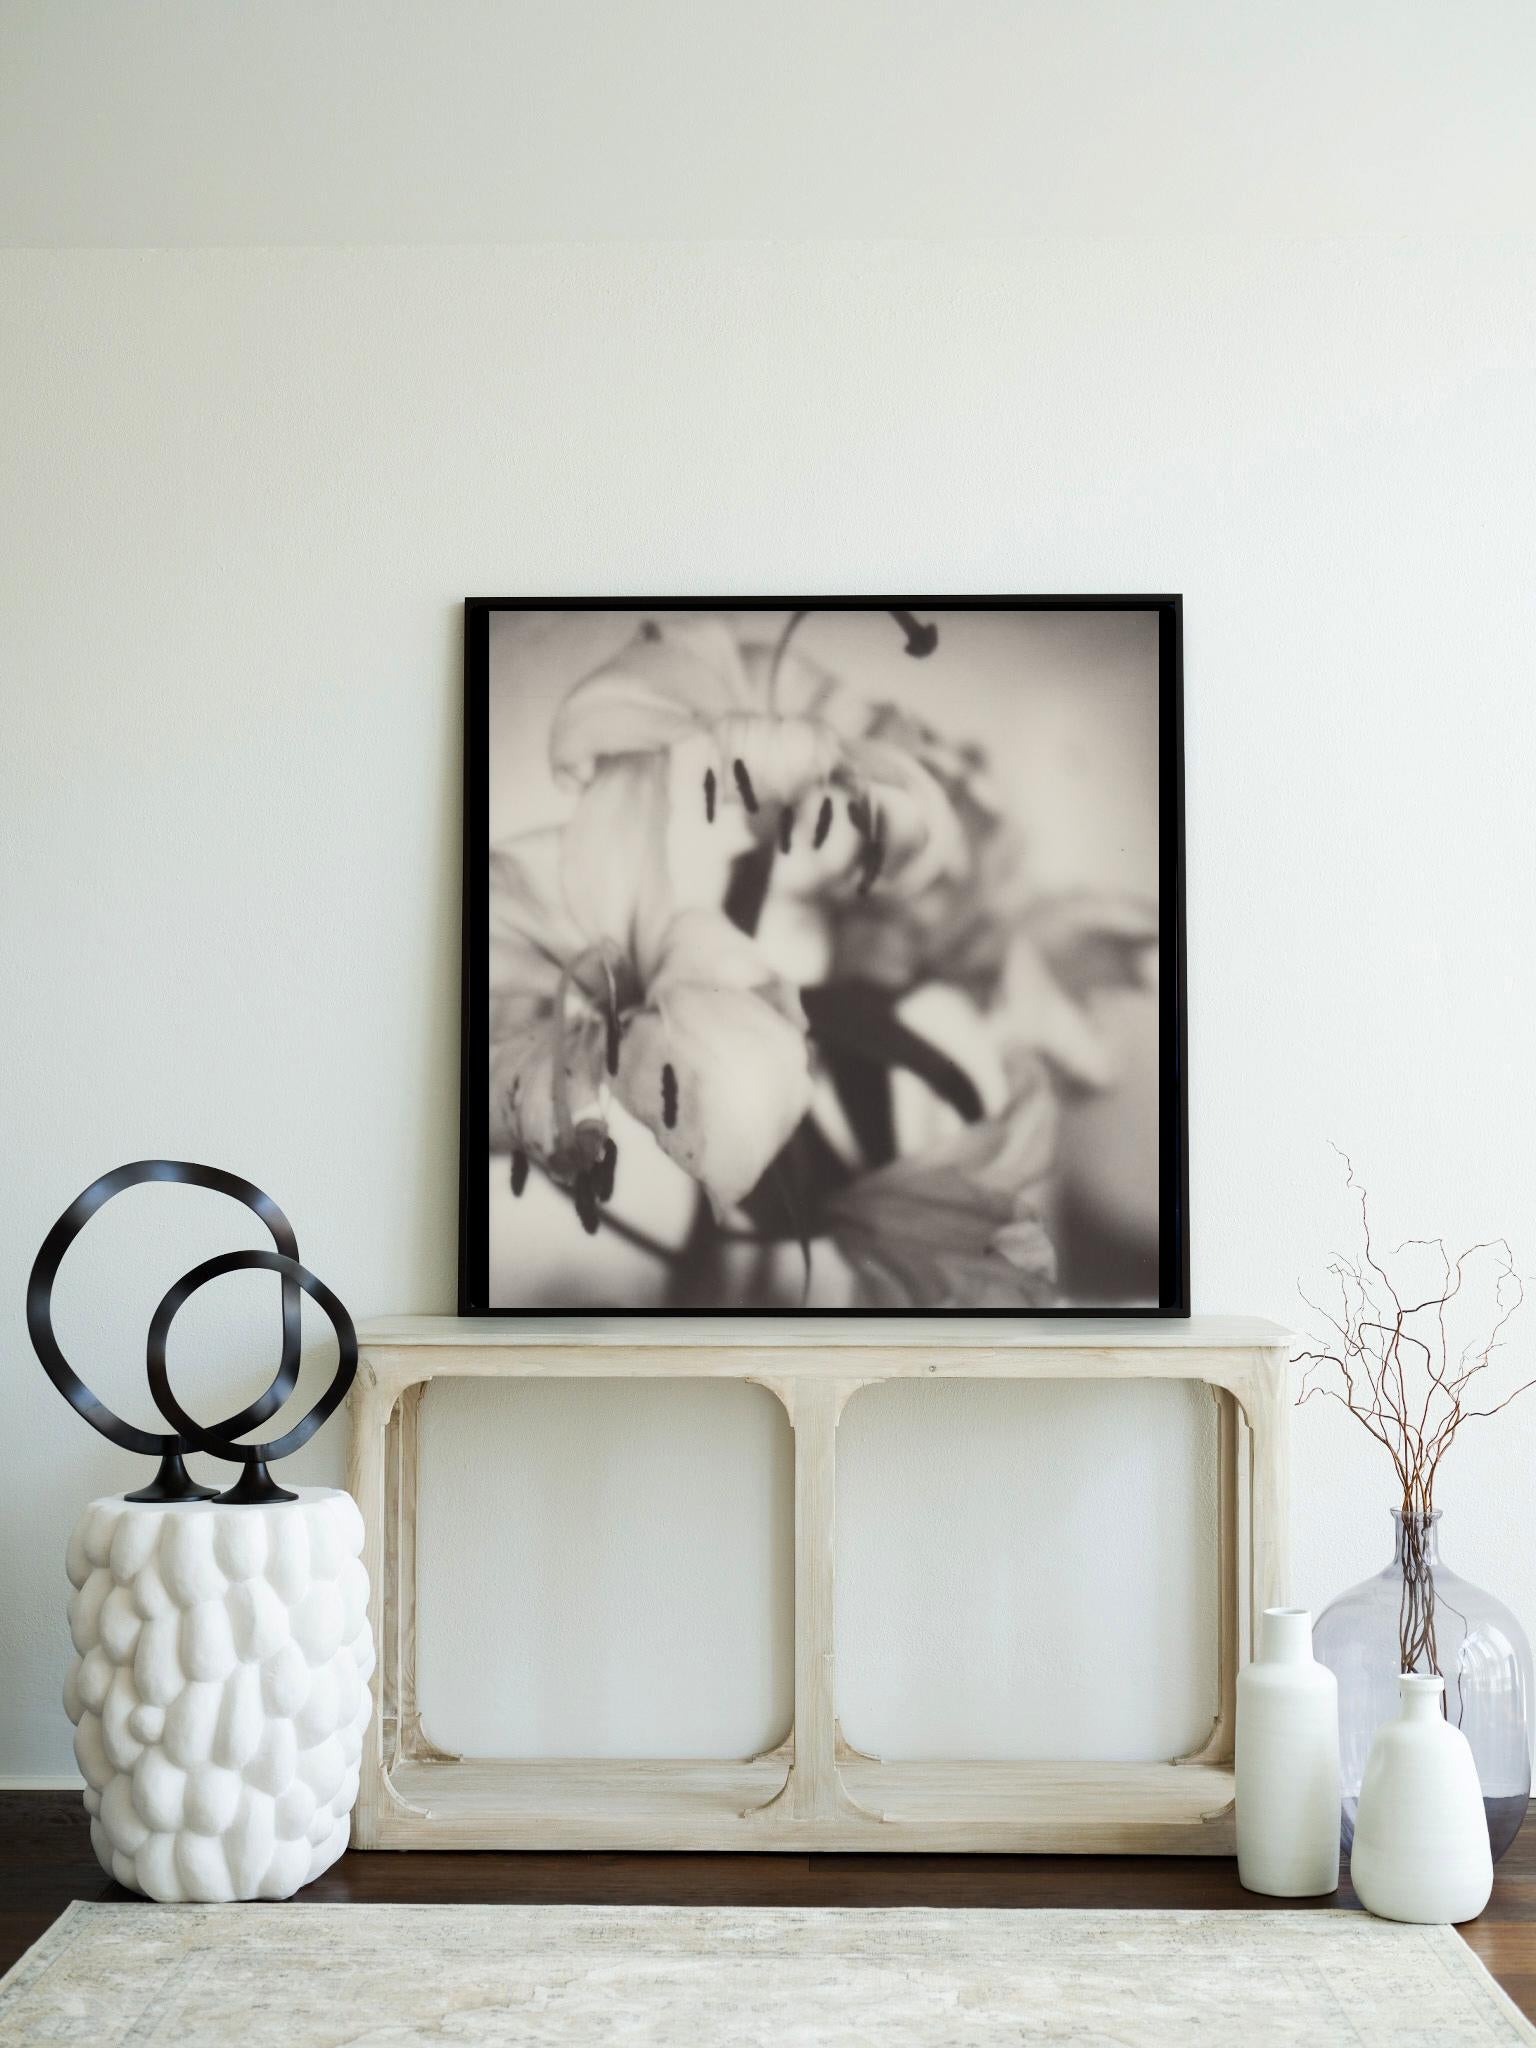 Lilies - 21st Century Photographic Floral Print from Black and White Polaroid - Gray Figurative Print by Pia Clodi